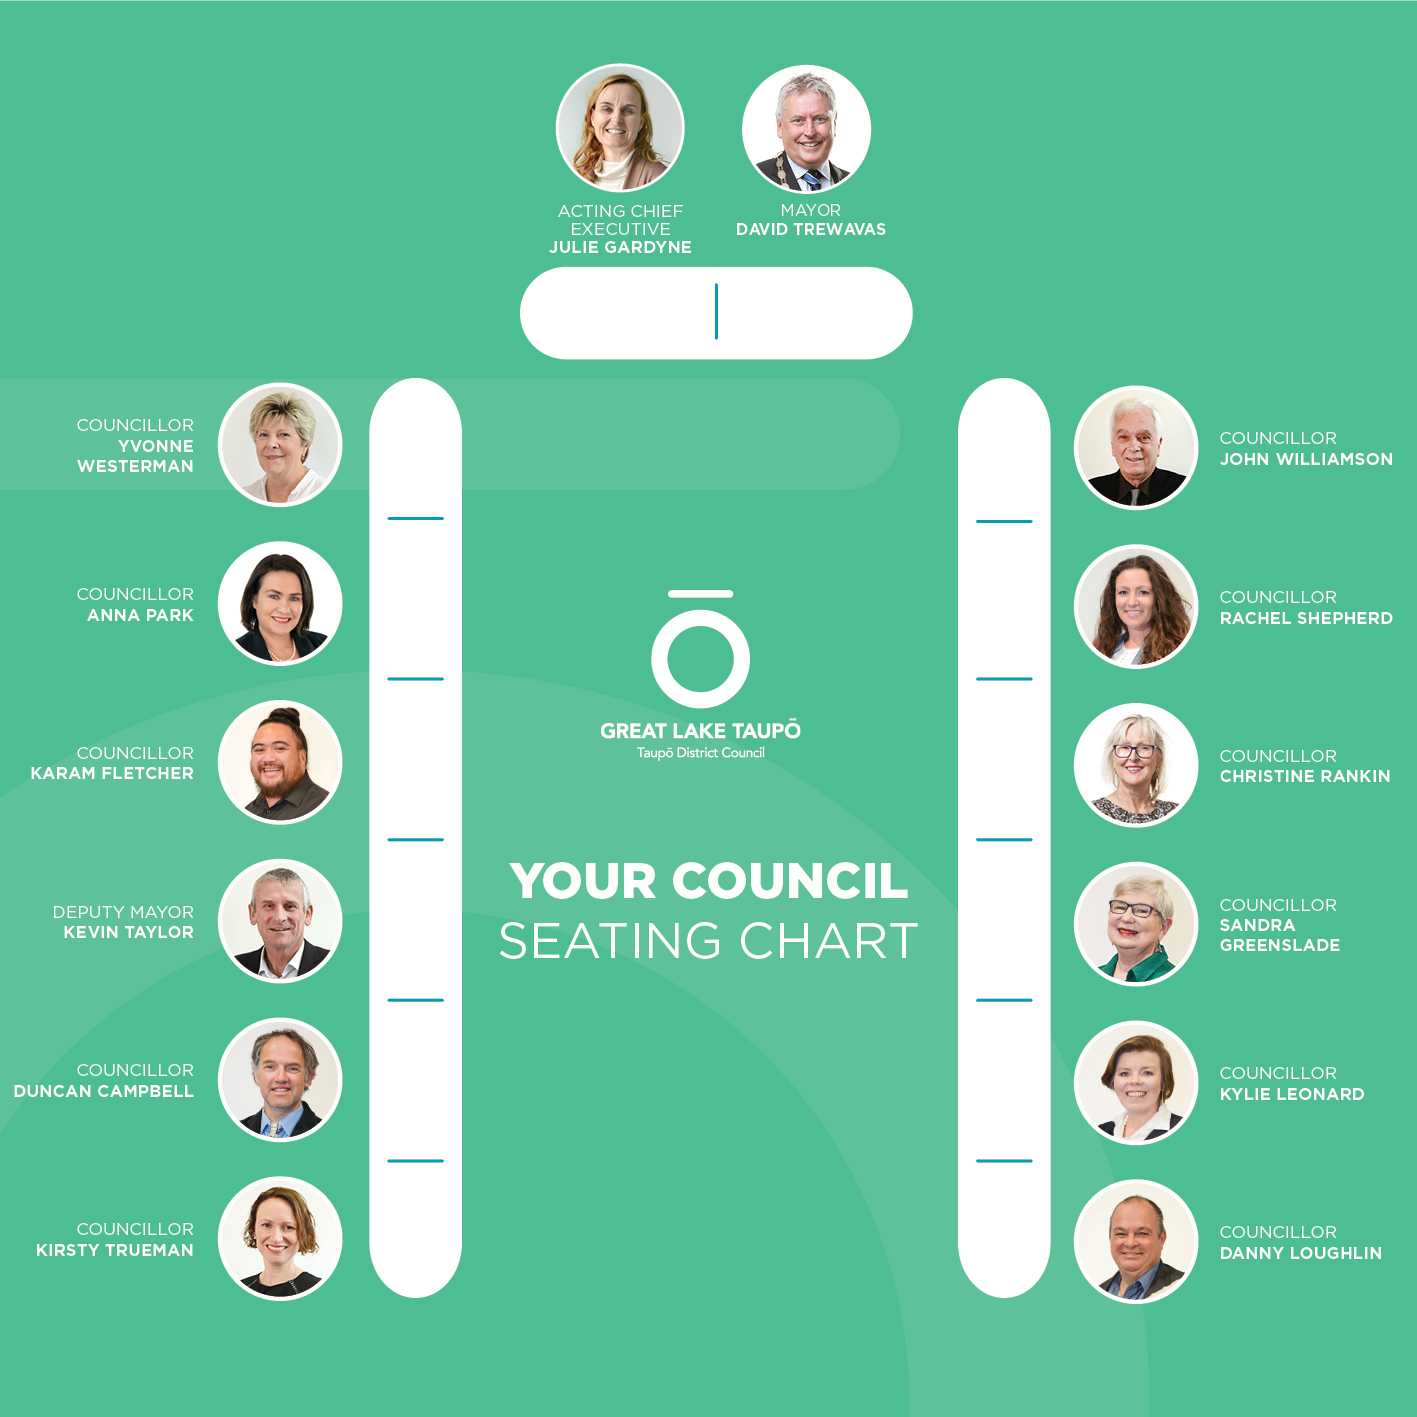 Council Chambers seating plan.  